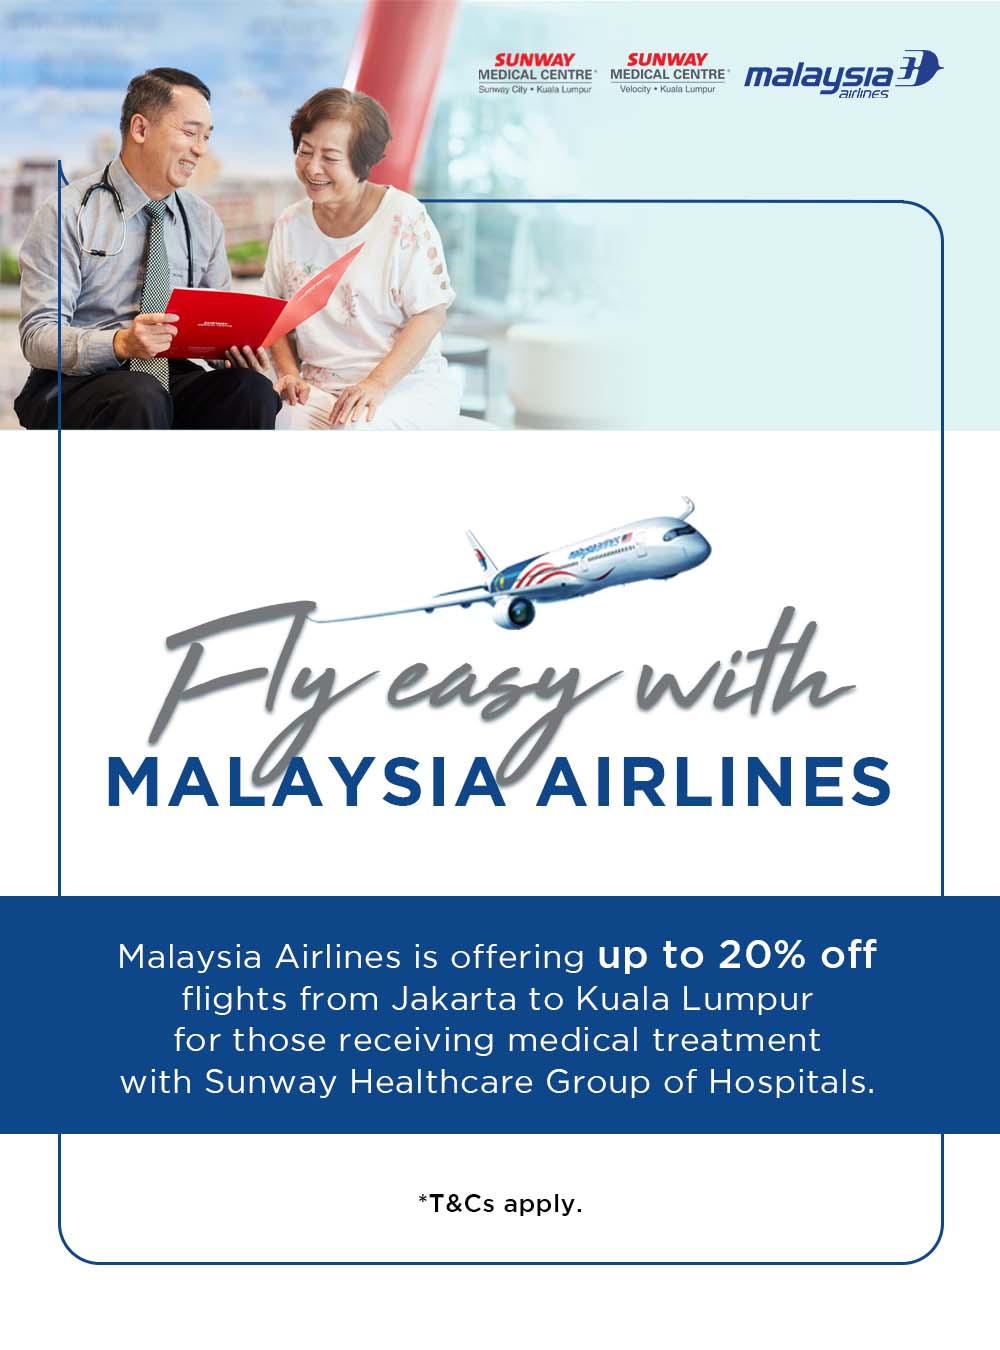 Welcome Health Tourists!     See our offerings for your hassle-free healthcare experience!  Free COVID-19 RT-PCR test (one time; for the patient)  Free medical check-up (for patient's companion)  50% off specialist teleconsultation   30% off quarantine fees  20% off AirAsia flights from Jakarta to Kuala Lumpur  Up to 20% off Malaysia Airlines flights from Jakarta to Kuala Lumpur  10% off Sunway Clio Hotel quarantine package  Exclusive offers and privileges at Sunway venues i.e. Sunway Lagoon Wildlife Park, Sunway Pyramid, and Sunway Velocity Mall     Offers are valid until 31st December 2021. Call us at +603-74941098 to learn more. 